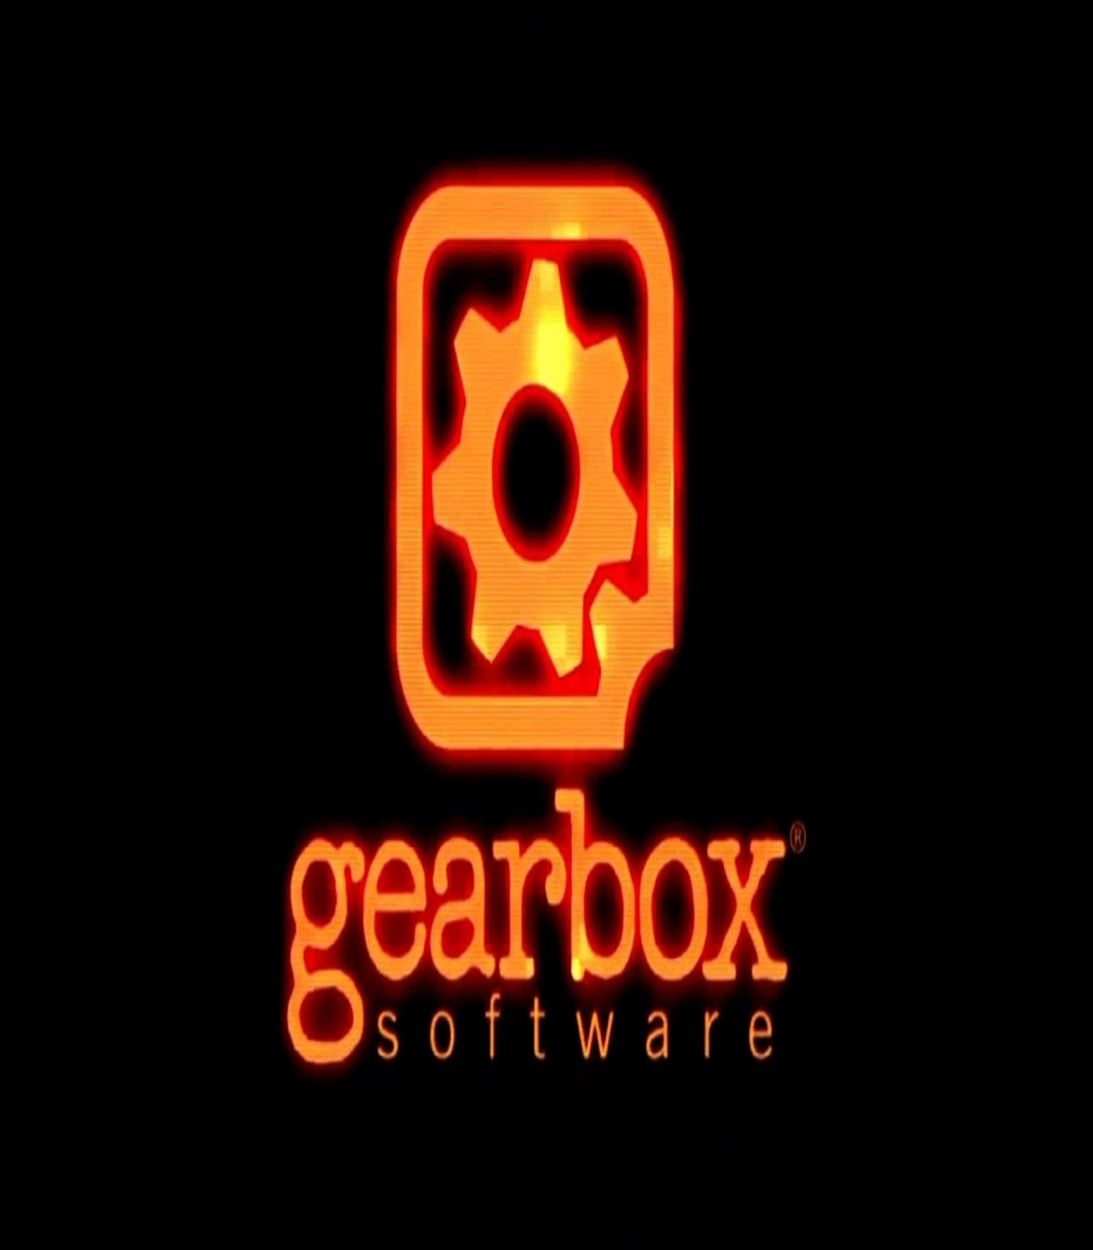 vertical and orange version of gearbox logo